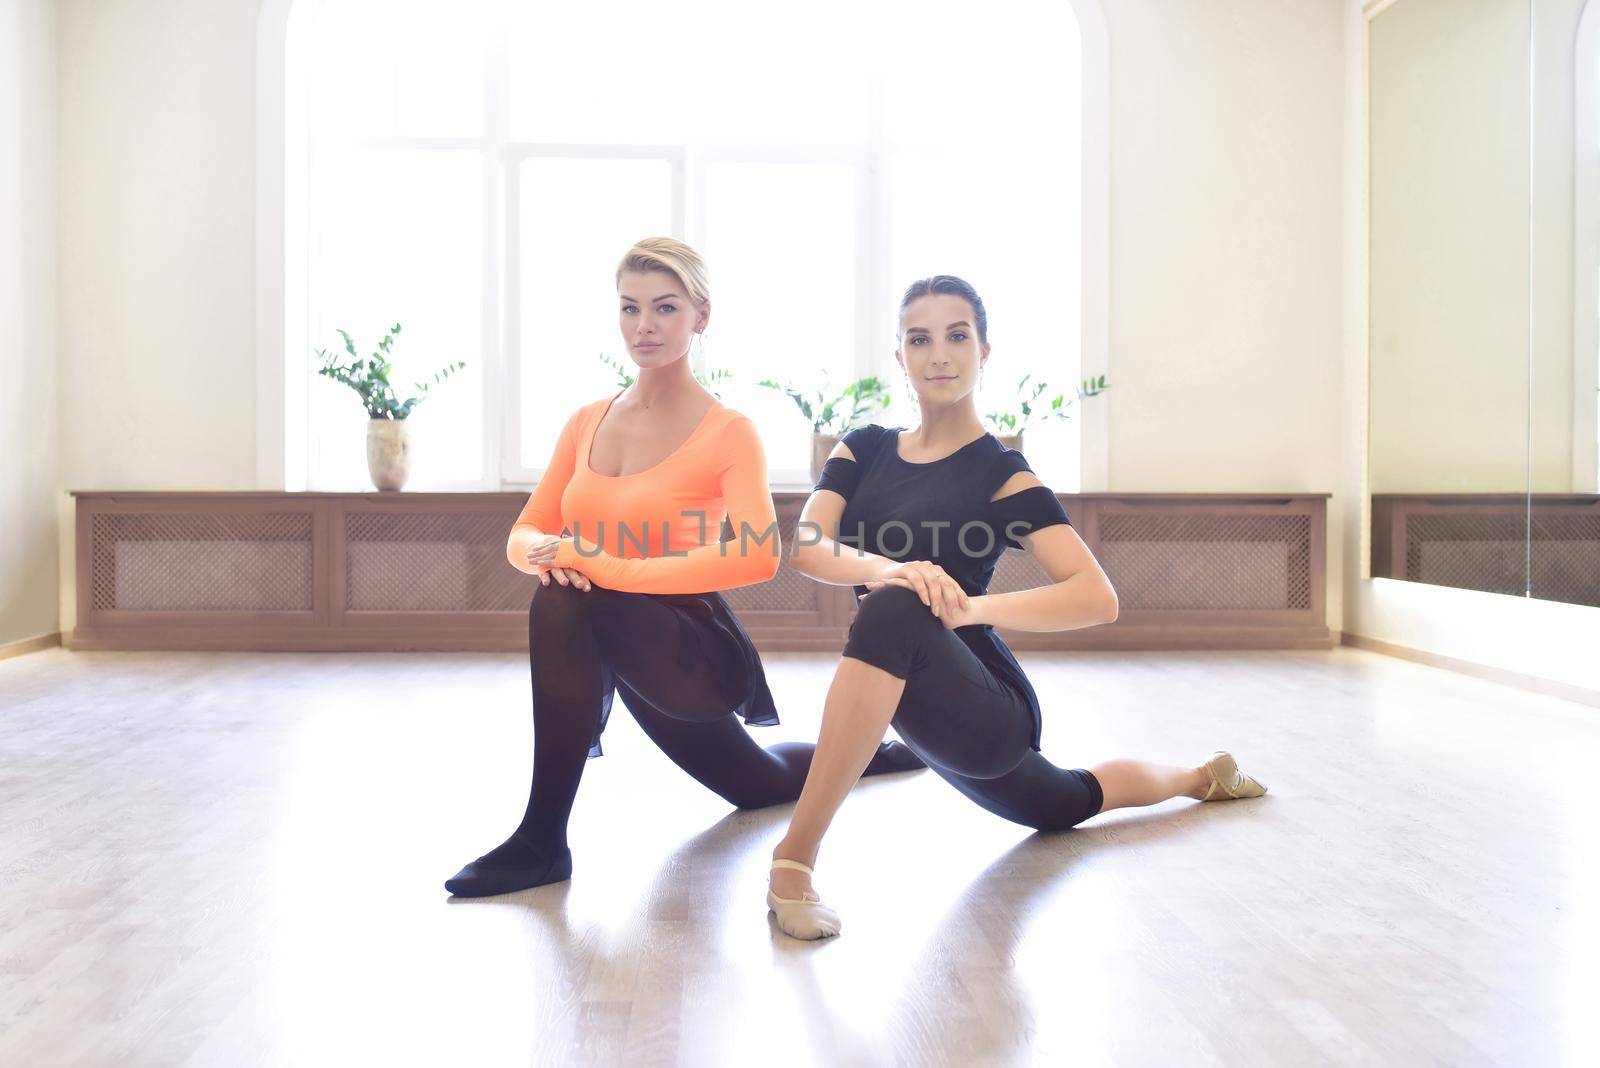 choreographer teacher mentor trainer of classical dance teaches posture help with stretching to young student learn dancing teen girl ballerina near ballet barre. Teaching gymnastics class by Nickstock